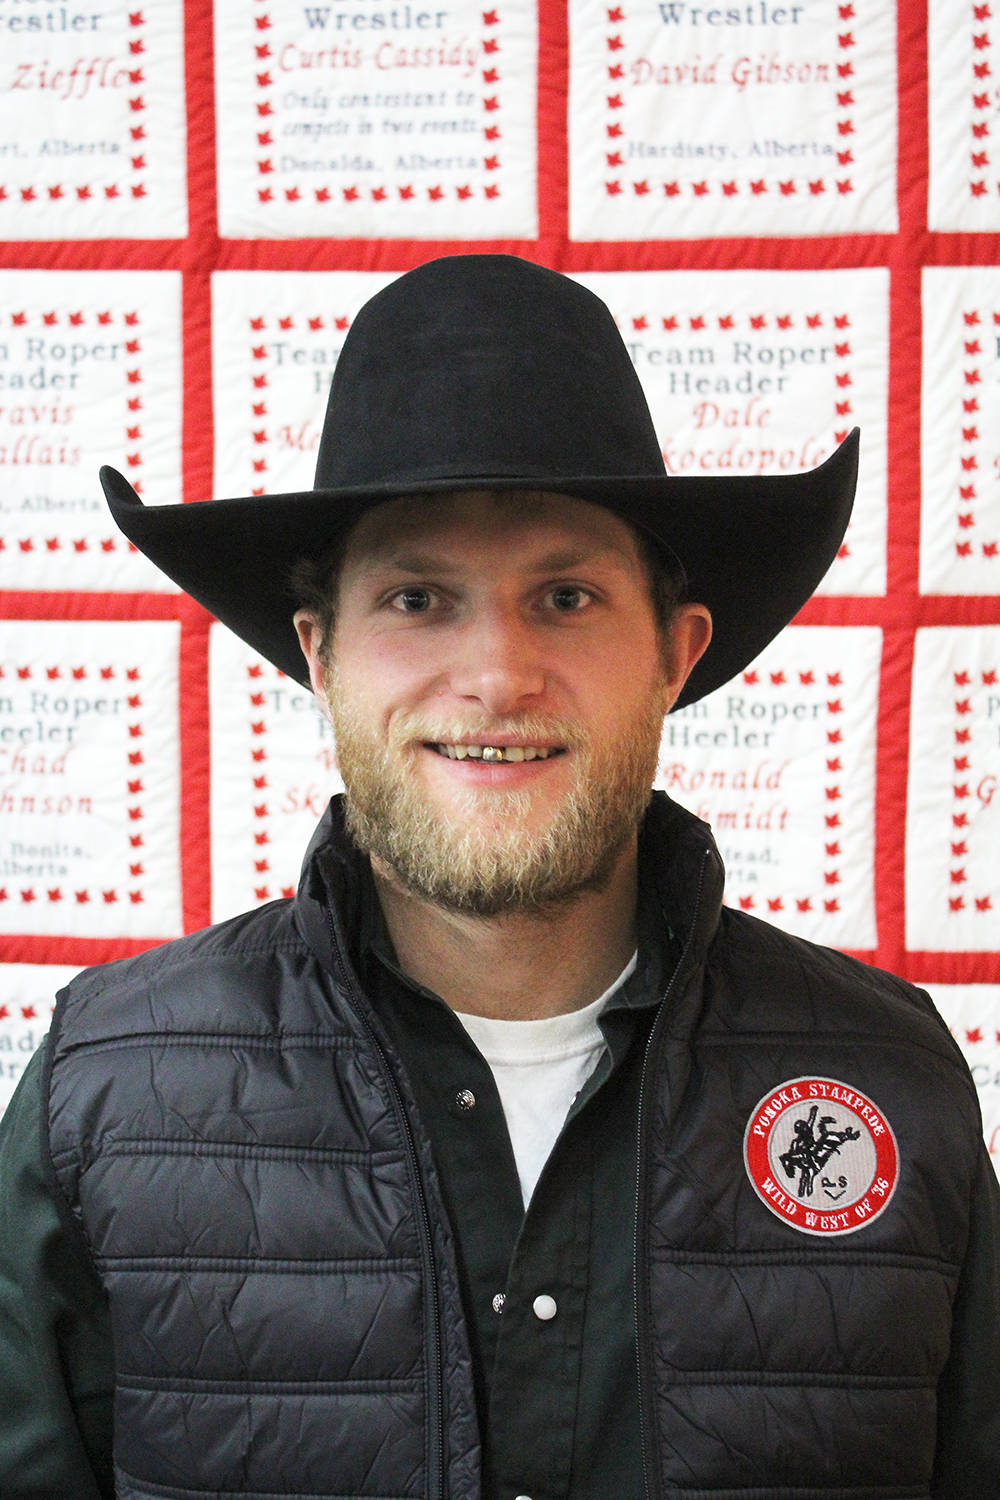 Ponoka’s Wacey Finkbeiner won the bull riding CFR title. Despite being bucked off in the final event, he had enough points to win overall.                                File photo